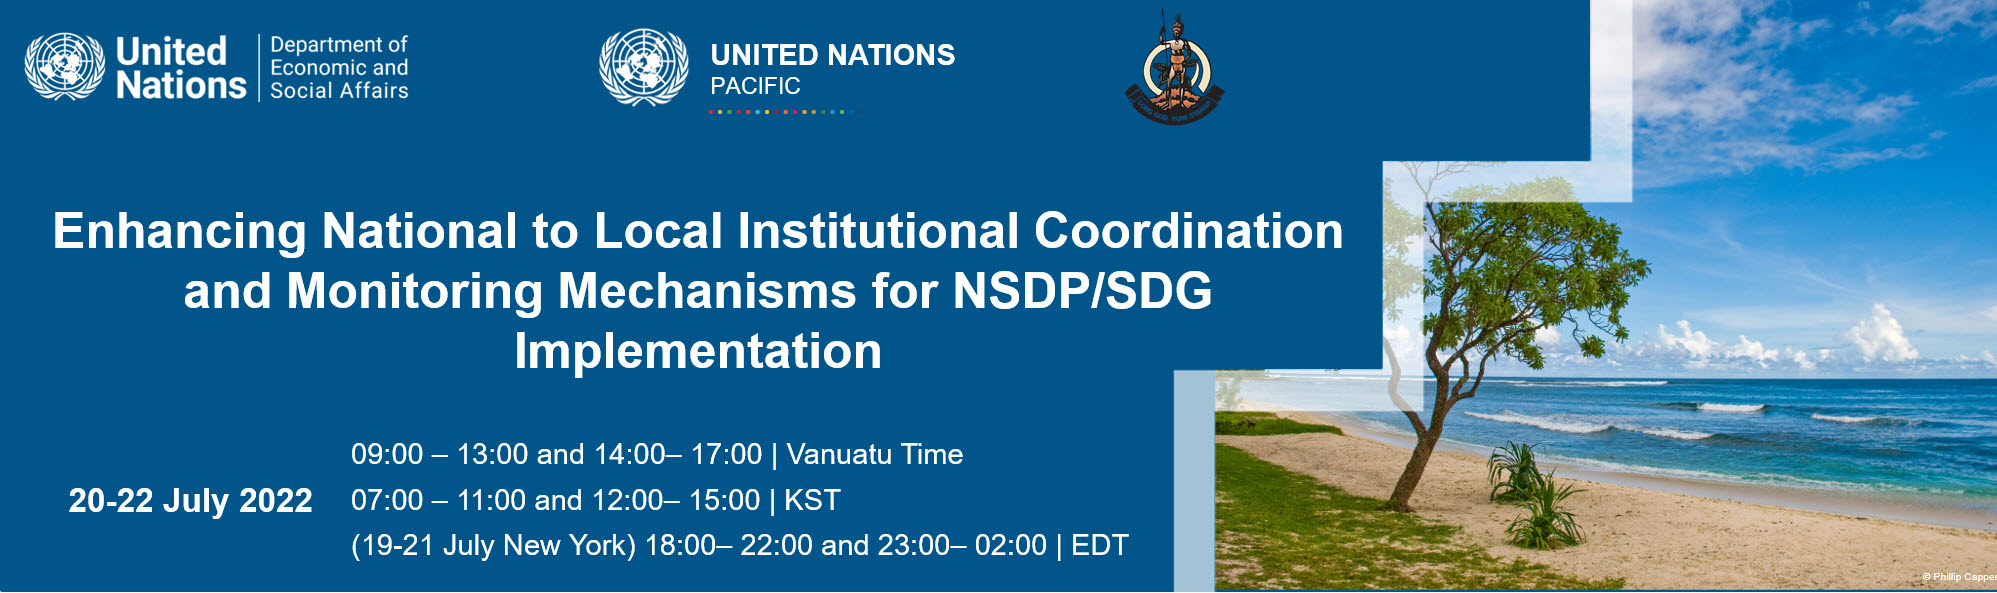 Enhancing National to Local Institutional Coordination and Monitoring Mechanisms for NSDP/SDG Implementation in Vanuatu